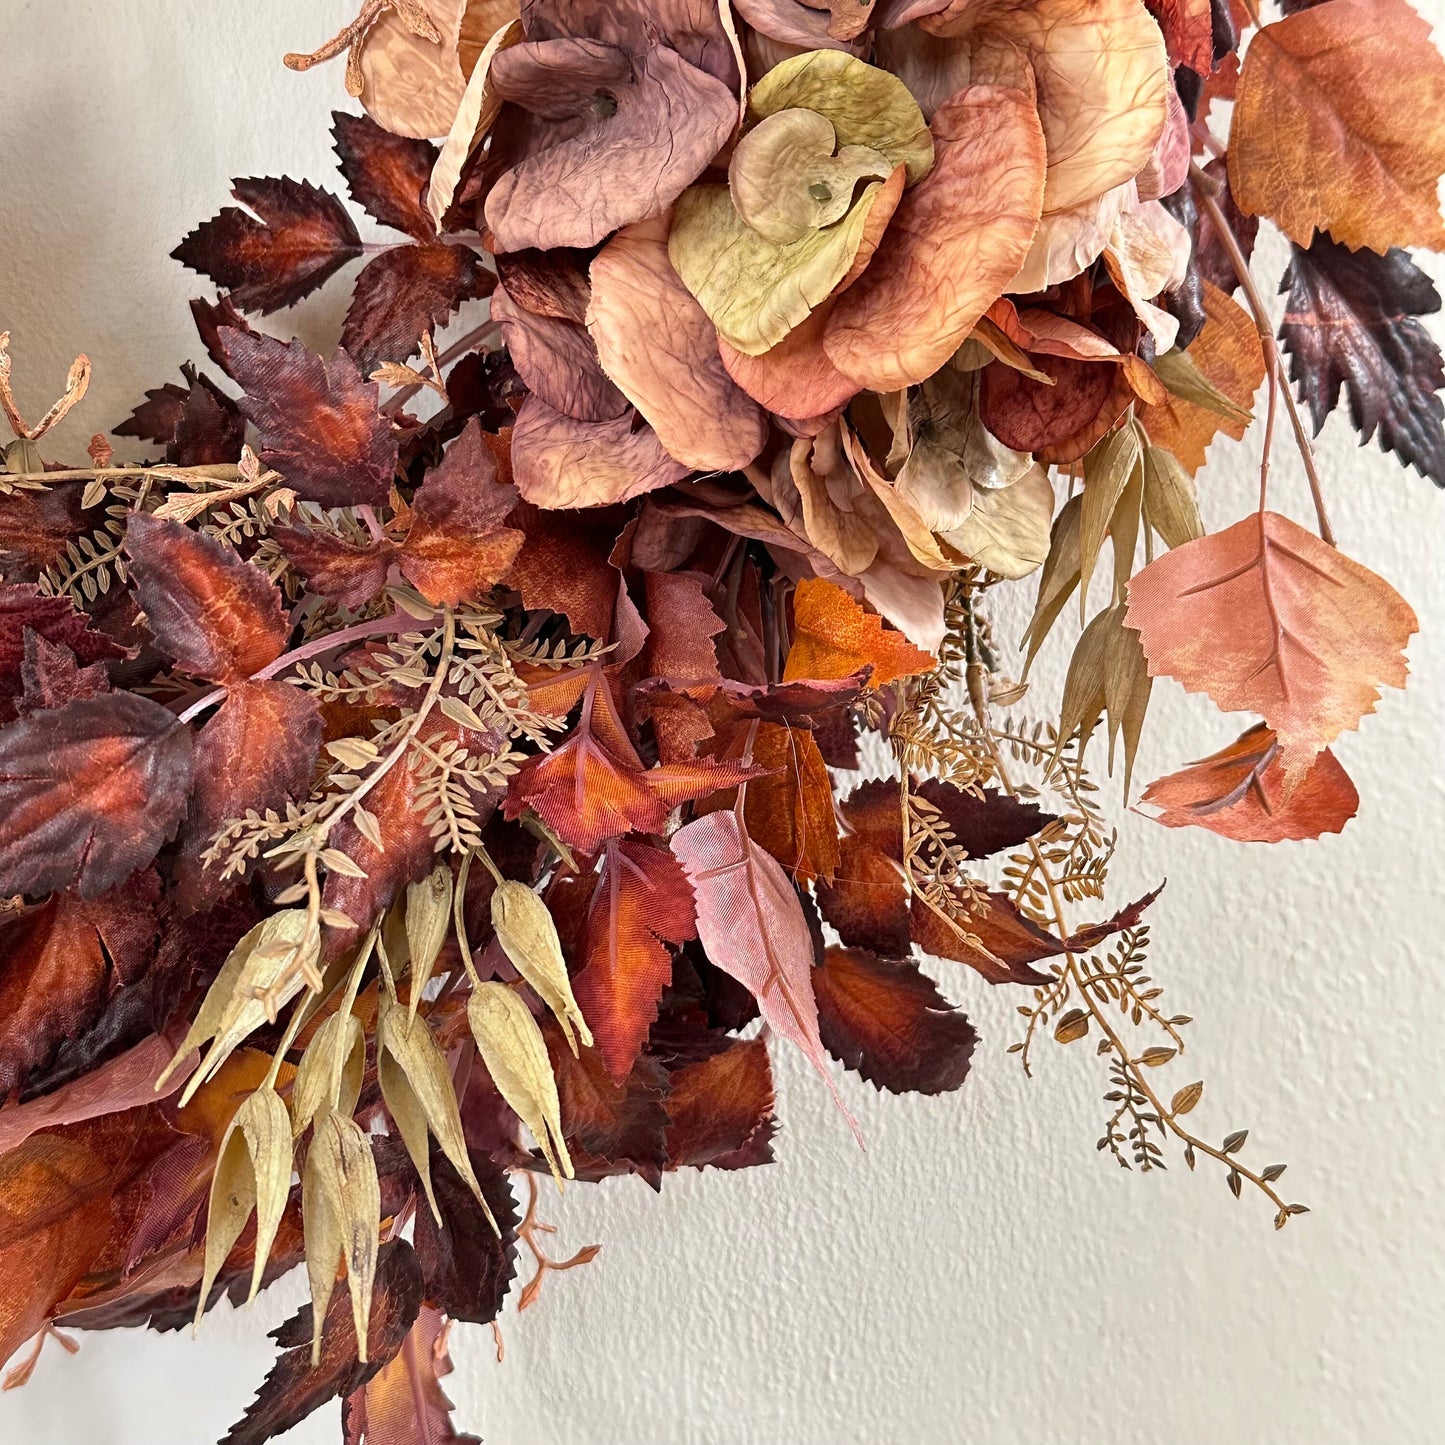 Fall Hydrangea and Eucalyptus Wreath | Terracotta and Rust Colored Faux Floral Wreath for Front Door | Elegant Autumn Wreath | READY TO SHIP